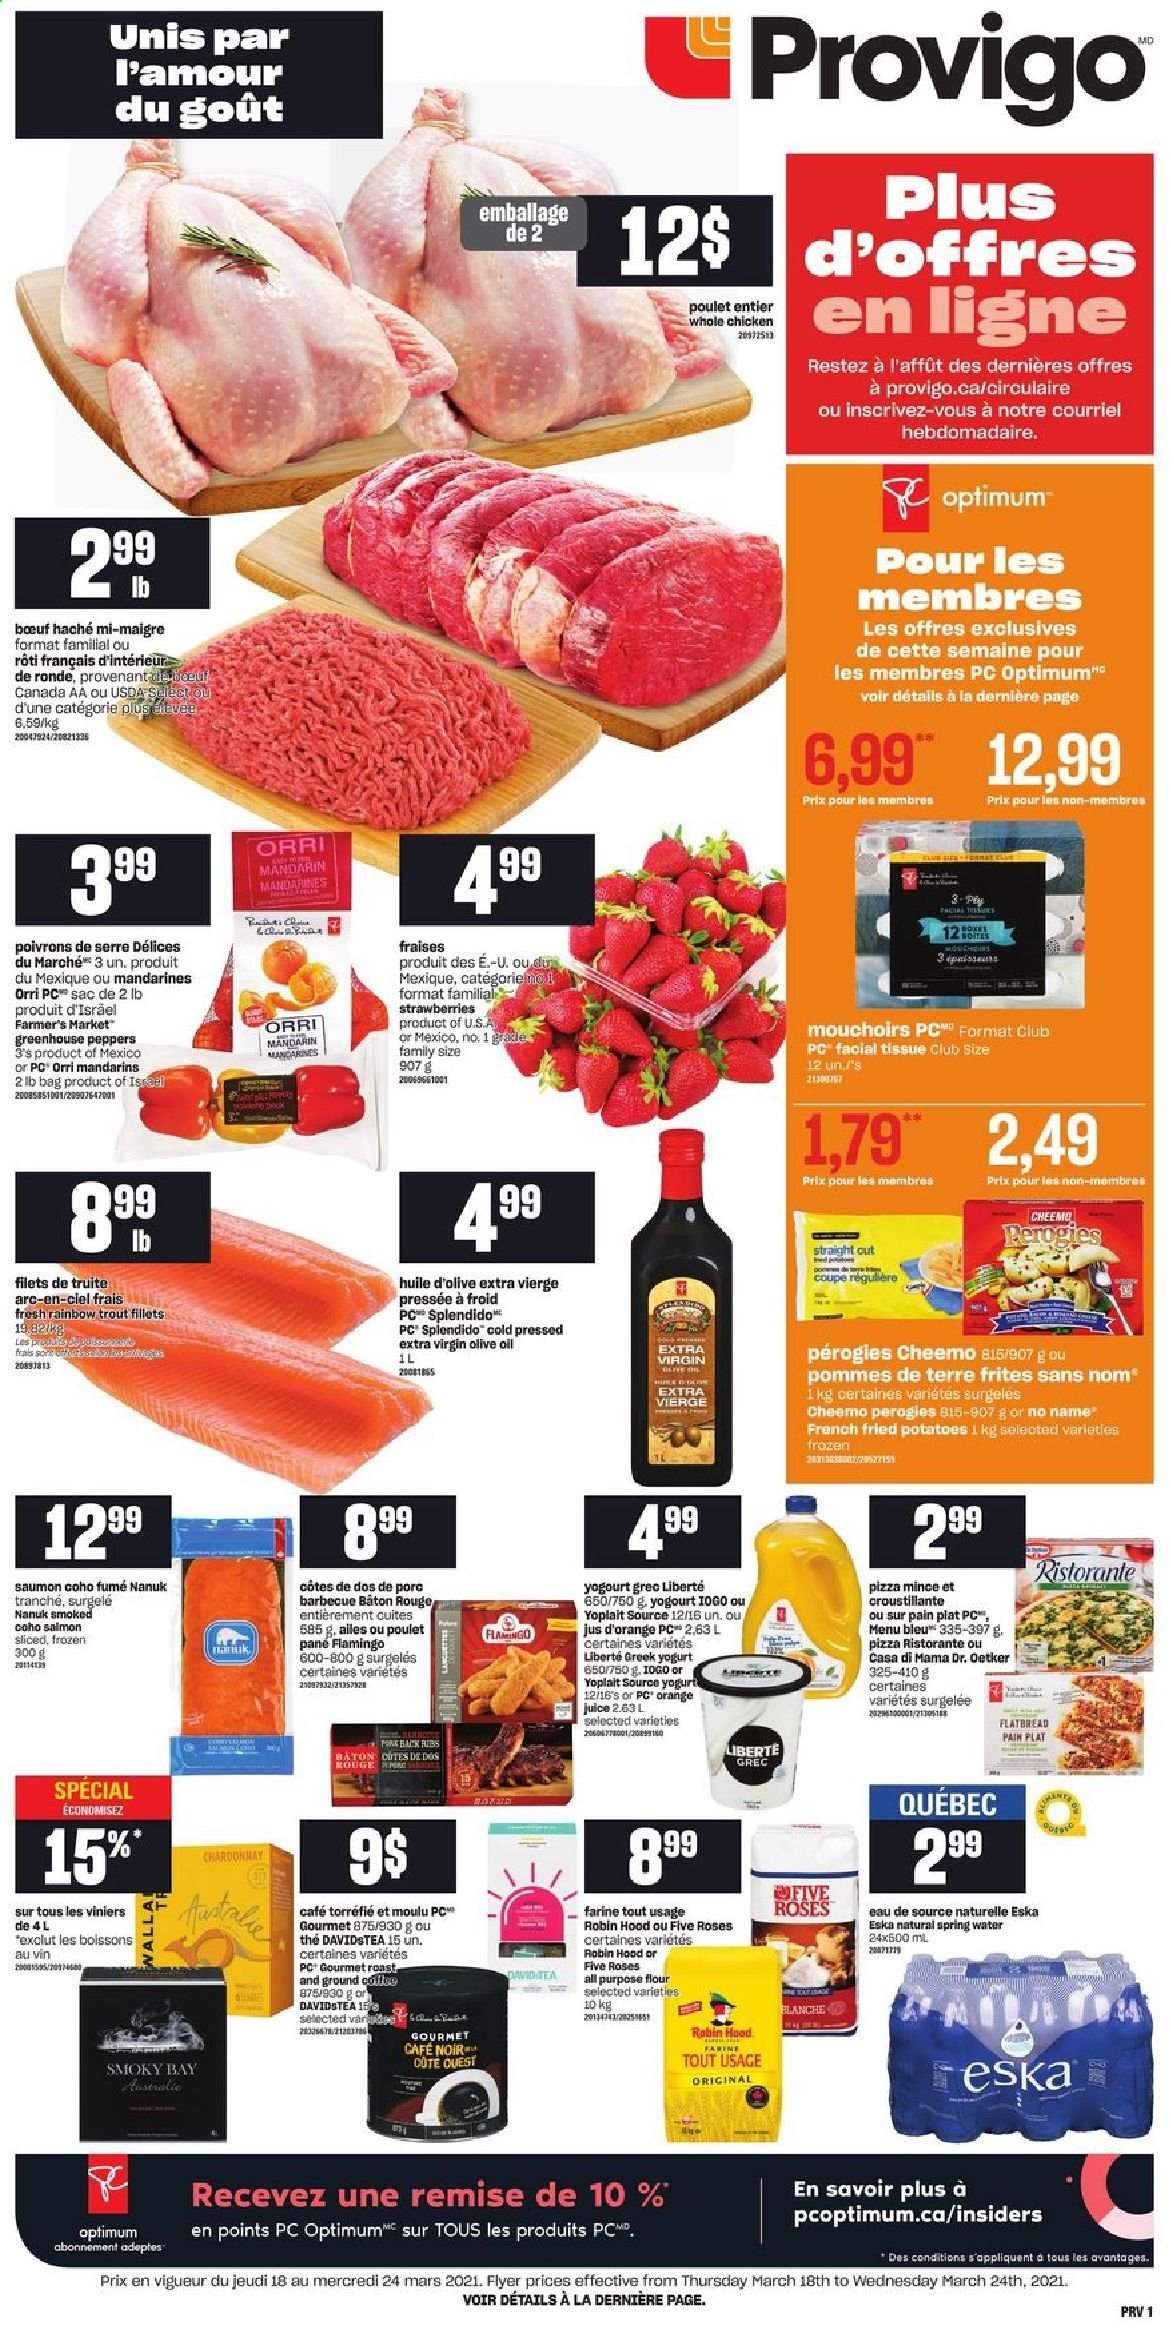 thumbnail - Provigo Flyer - March 18, 2021 - March 24, 2021 - Sales products - flatbread, potatoes, peppers, mandarines, strawberries, salmon, trout, No Name, pizza, Dr. Oetker, greek yoghurt, yoghurt, Yoplait, Mars, all purpose flour, flour, extra virgin olive oil, olive oil, oil, juice, spring water, whole chicken, chicken, tissues. Page 1.